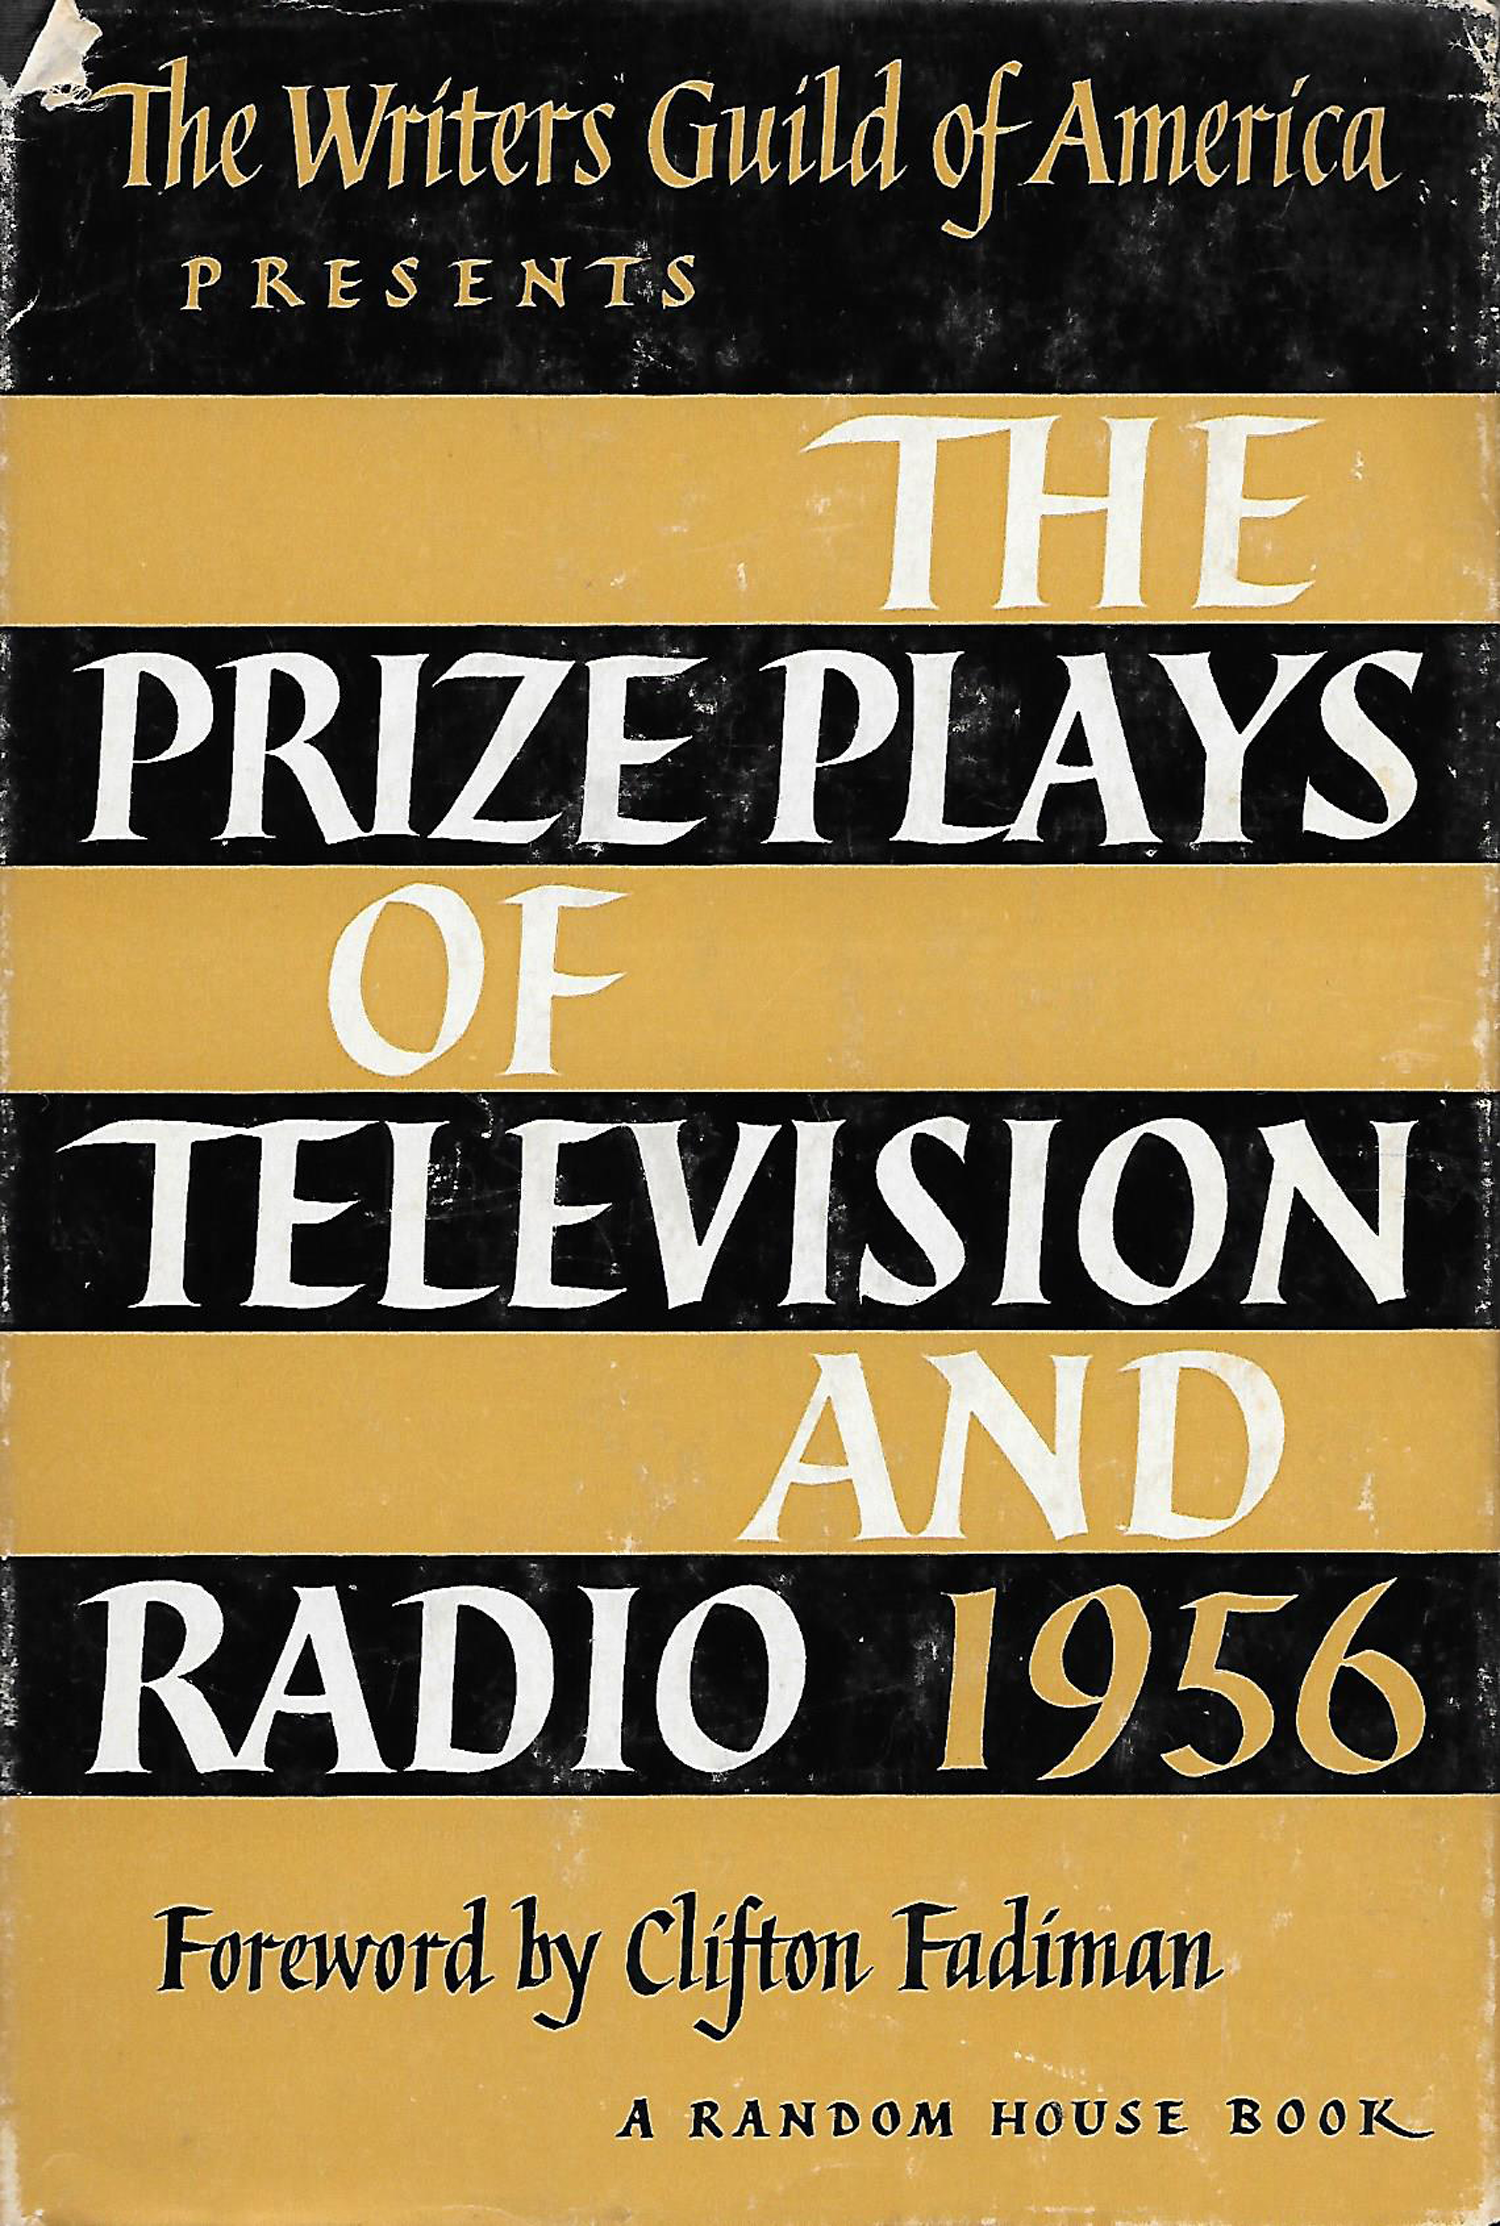 The Prize Plays of Television and Radio 1956